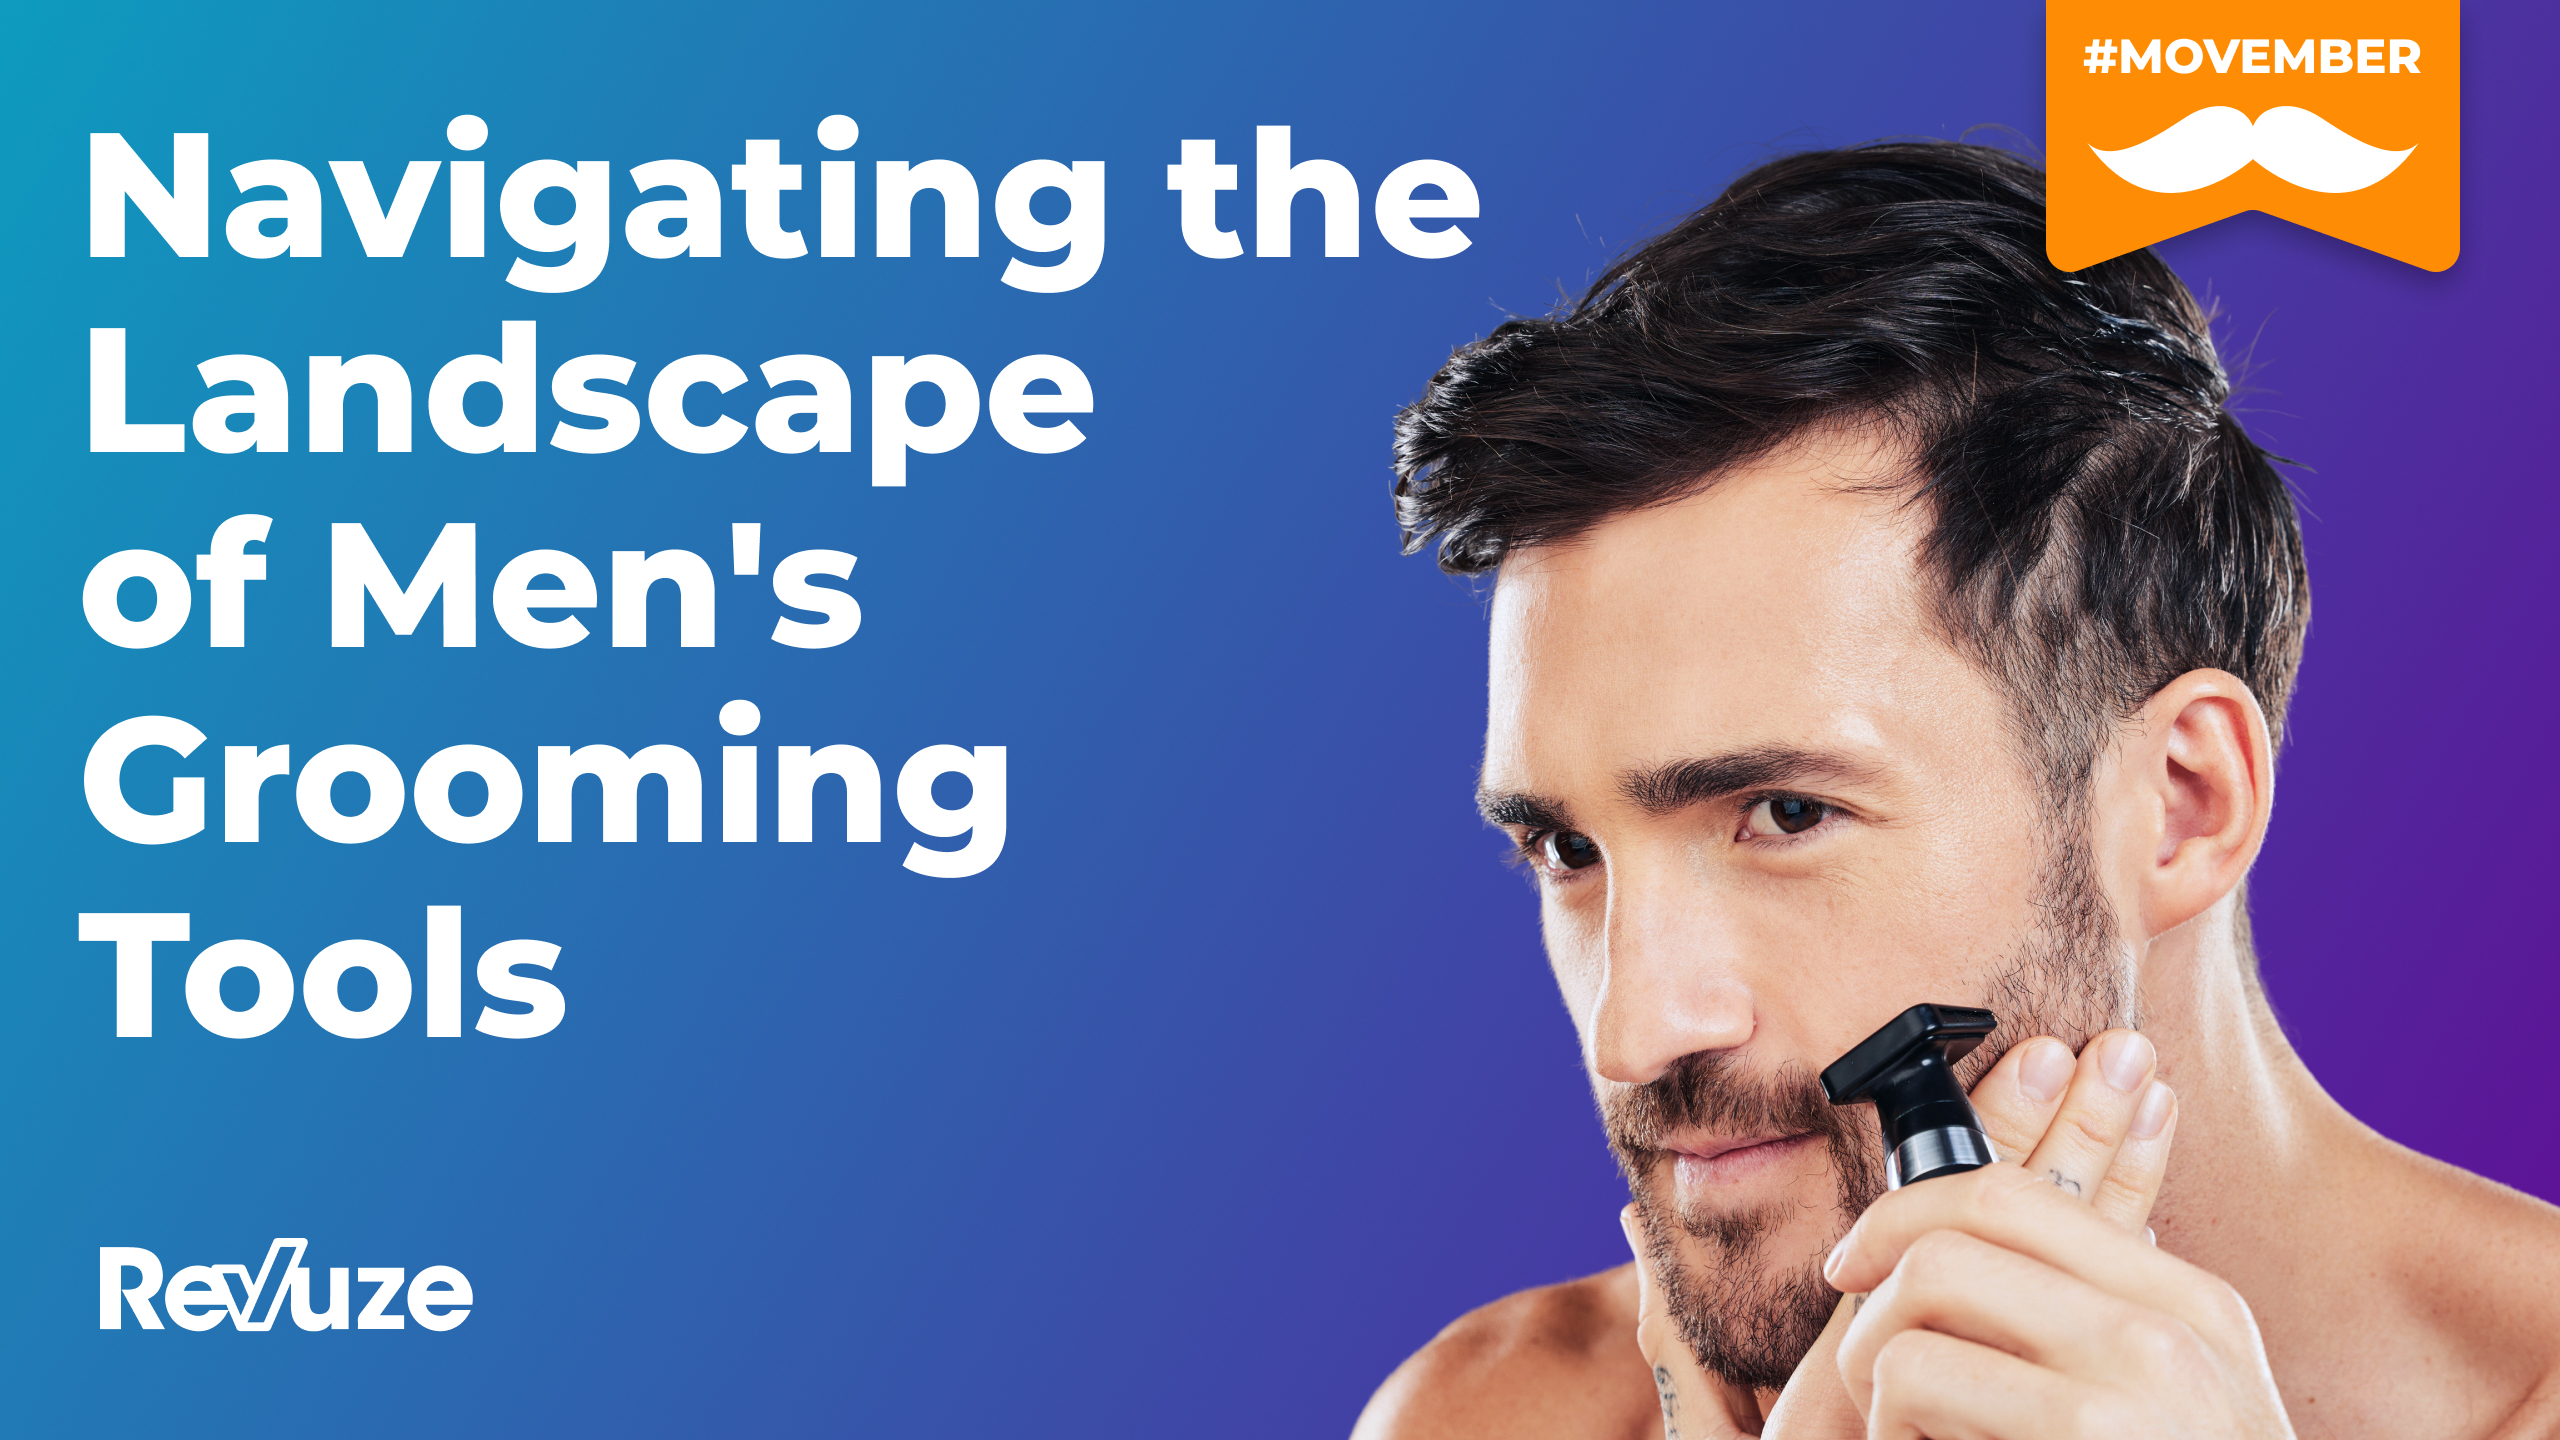 Navigating the Landscape of Men’s Grooming Tools